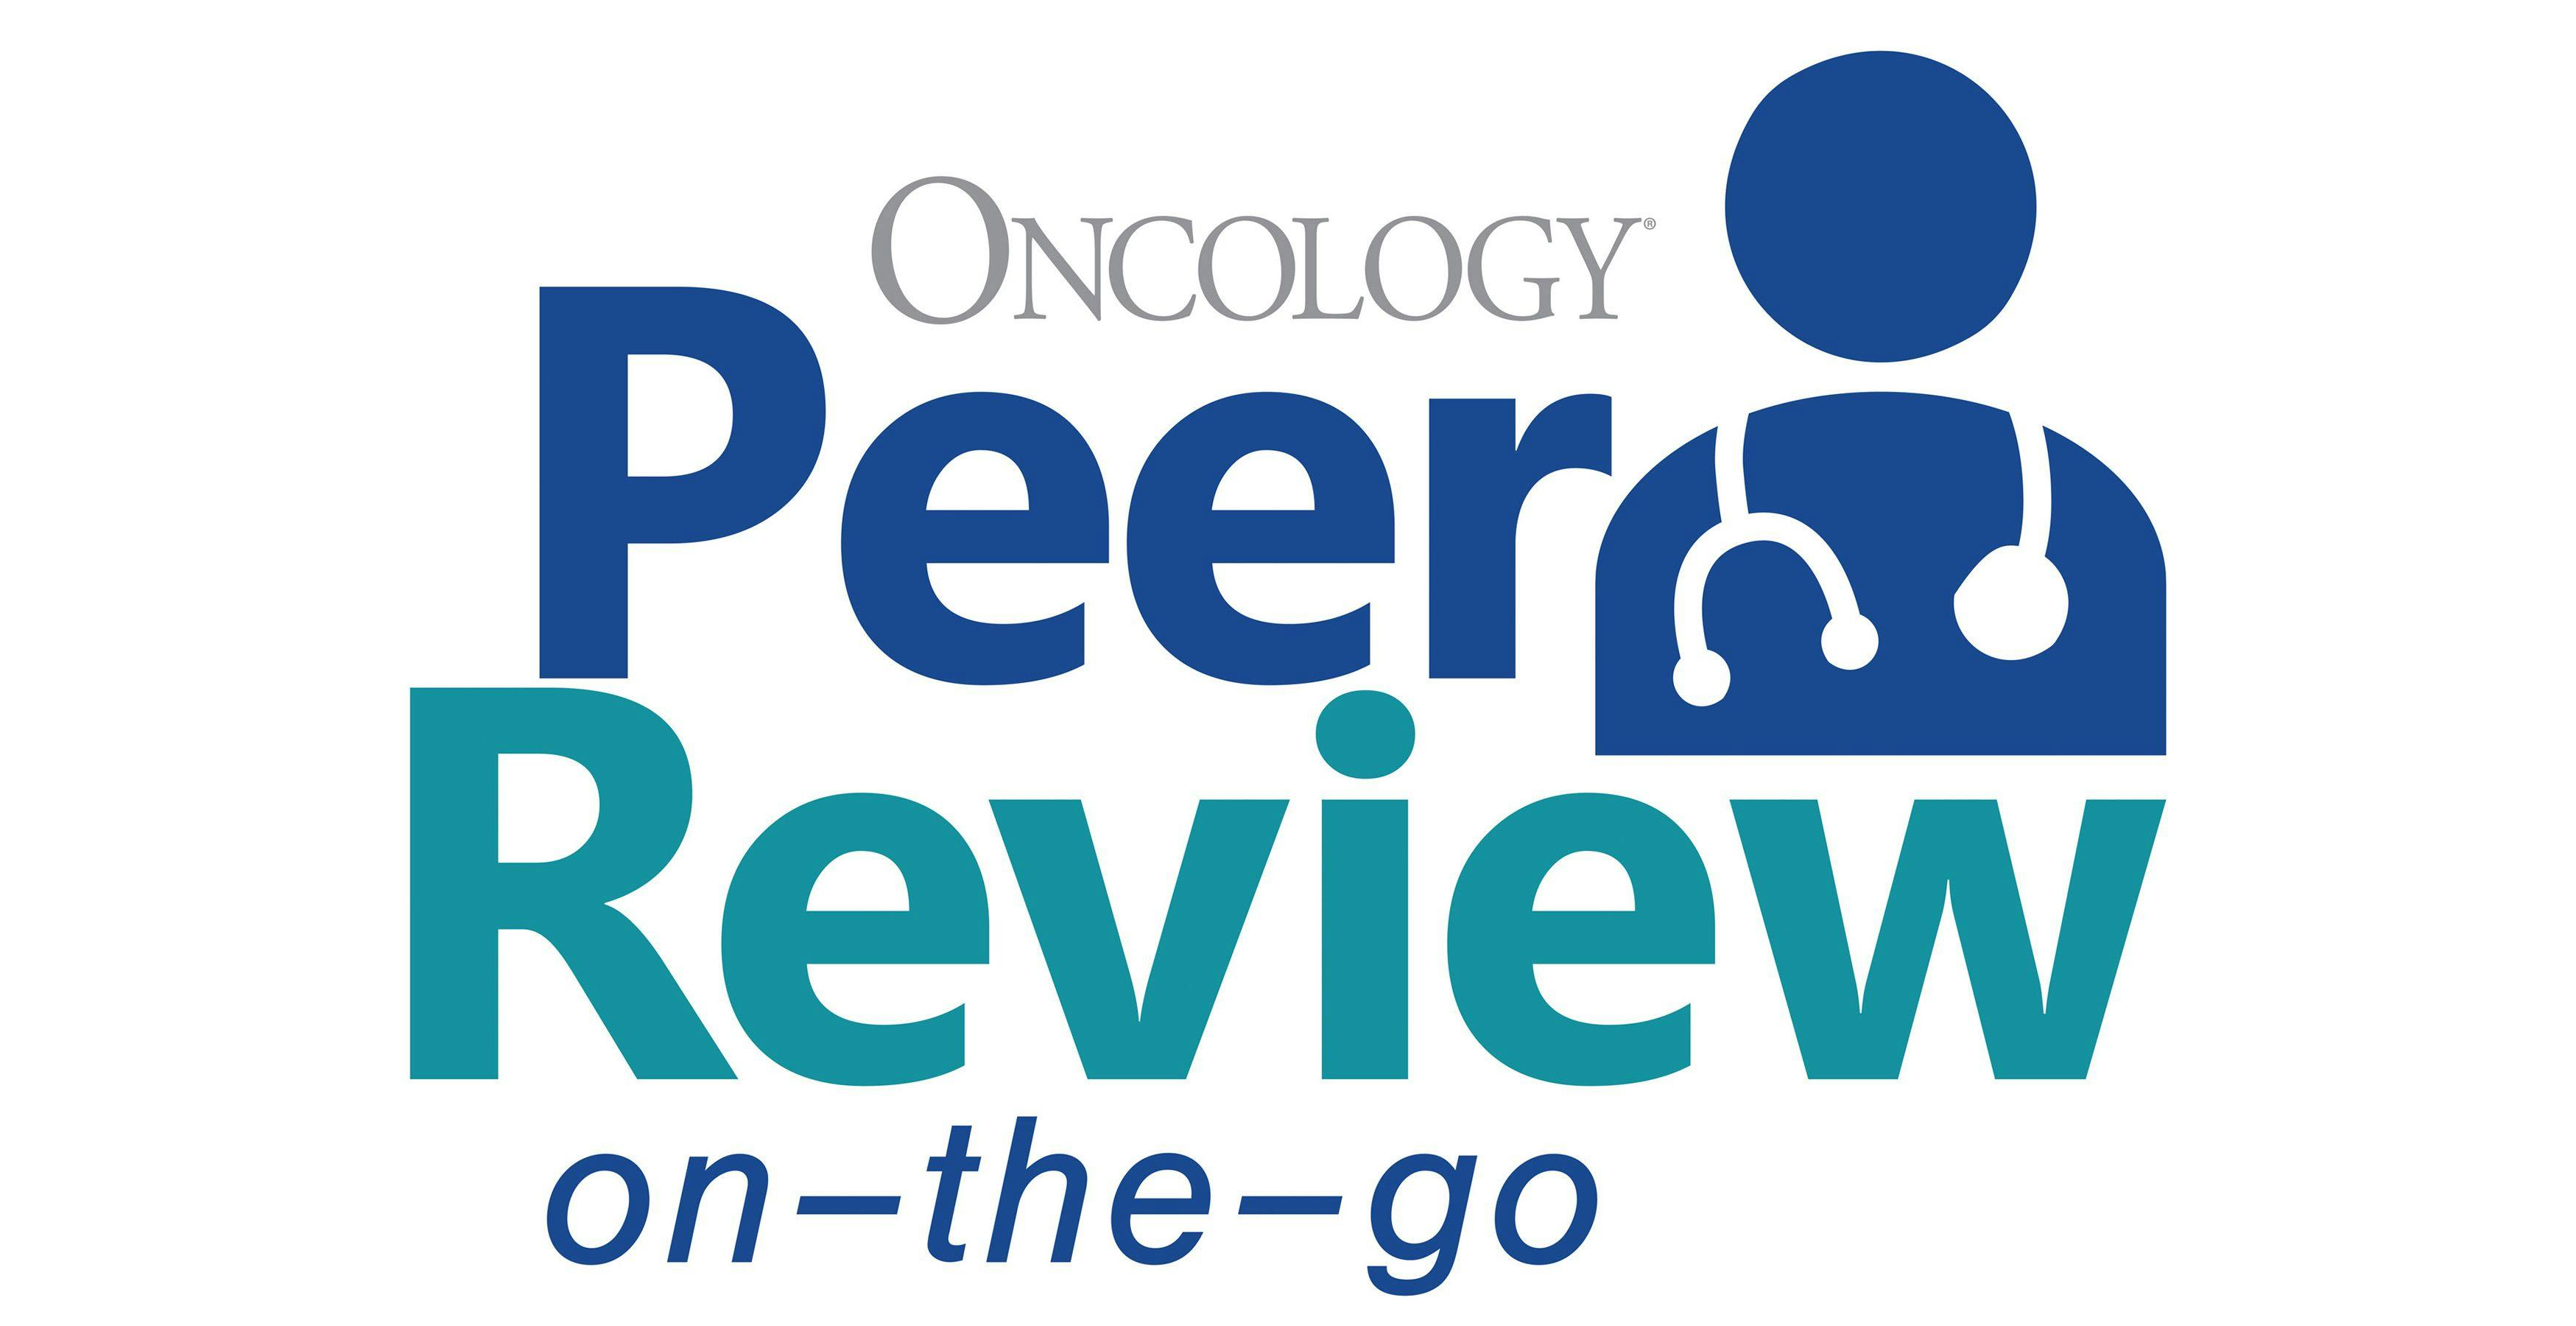 Oncology Peer Review On-The-Go: Kami Maddocks, MD, on Rechallenging With Rituximab and Second-Line Therapies for R/R DLBCL